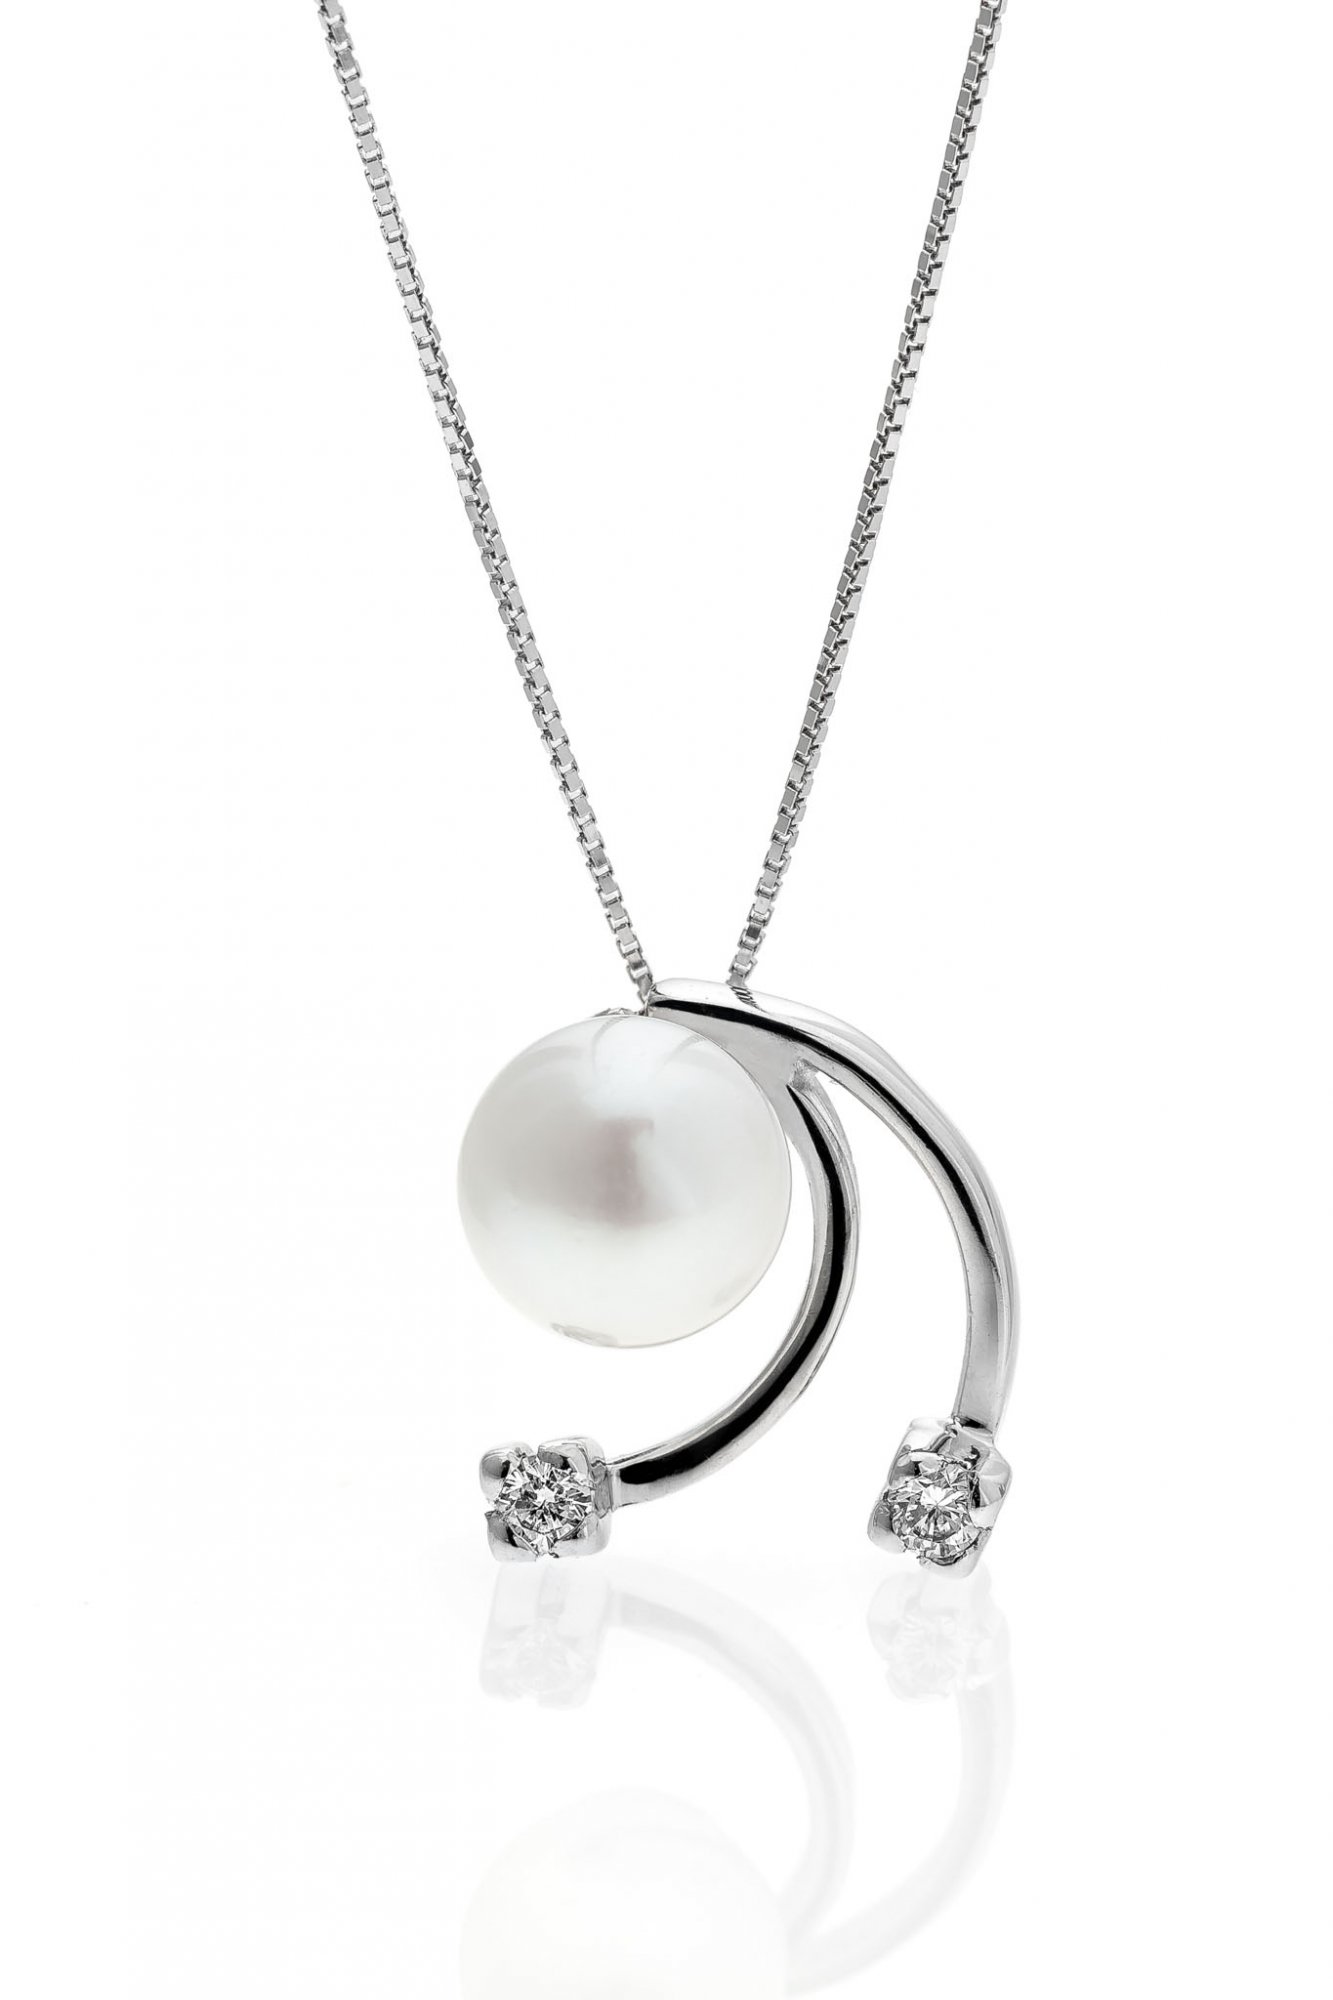 18 KT white gold  necklace with Akoya Pearl and natural round brilliant cut diamonds